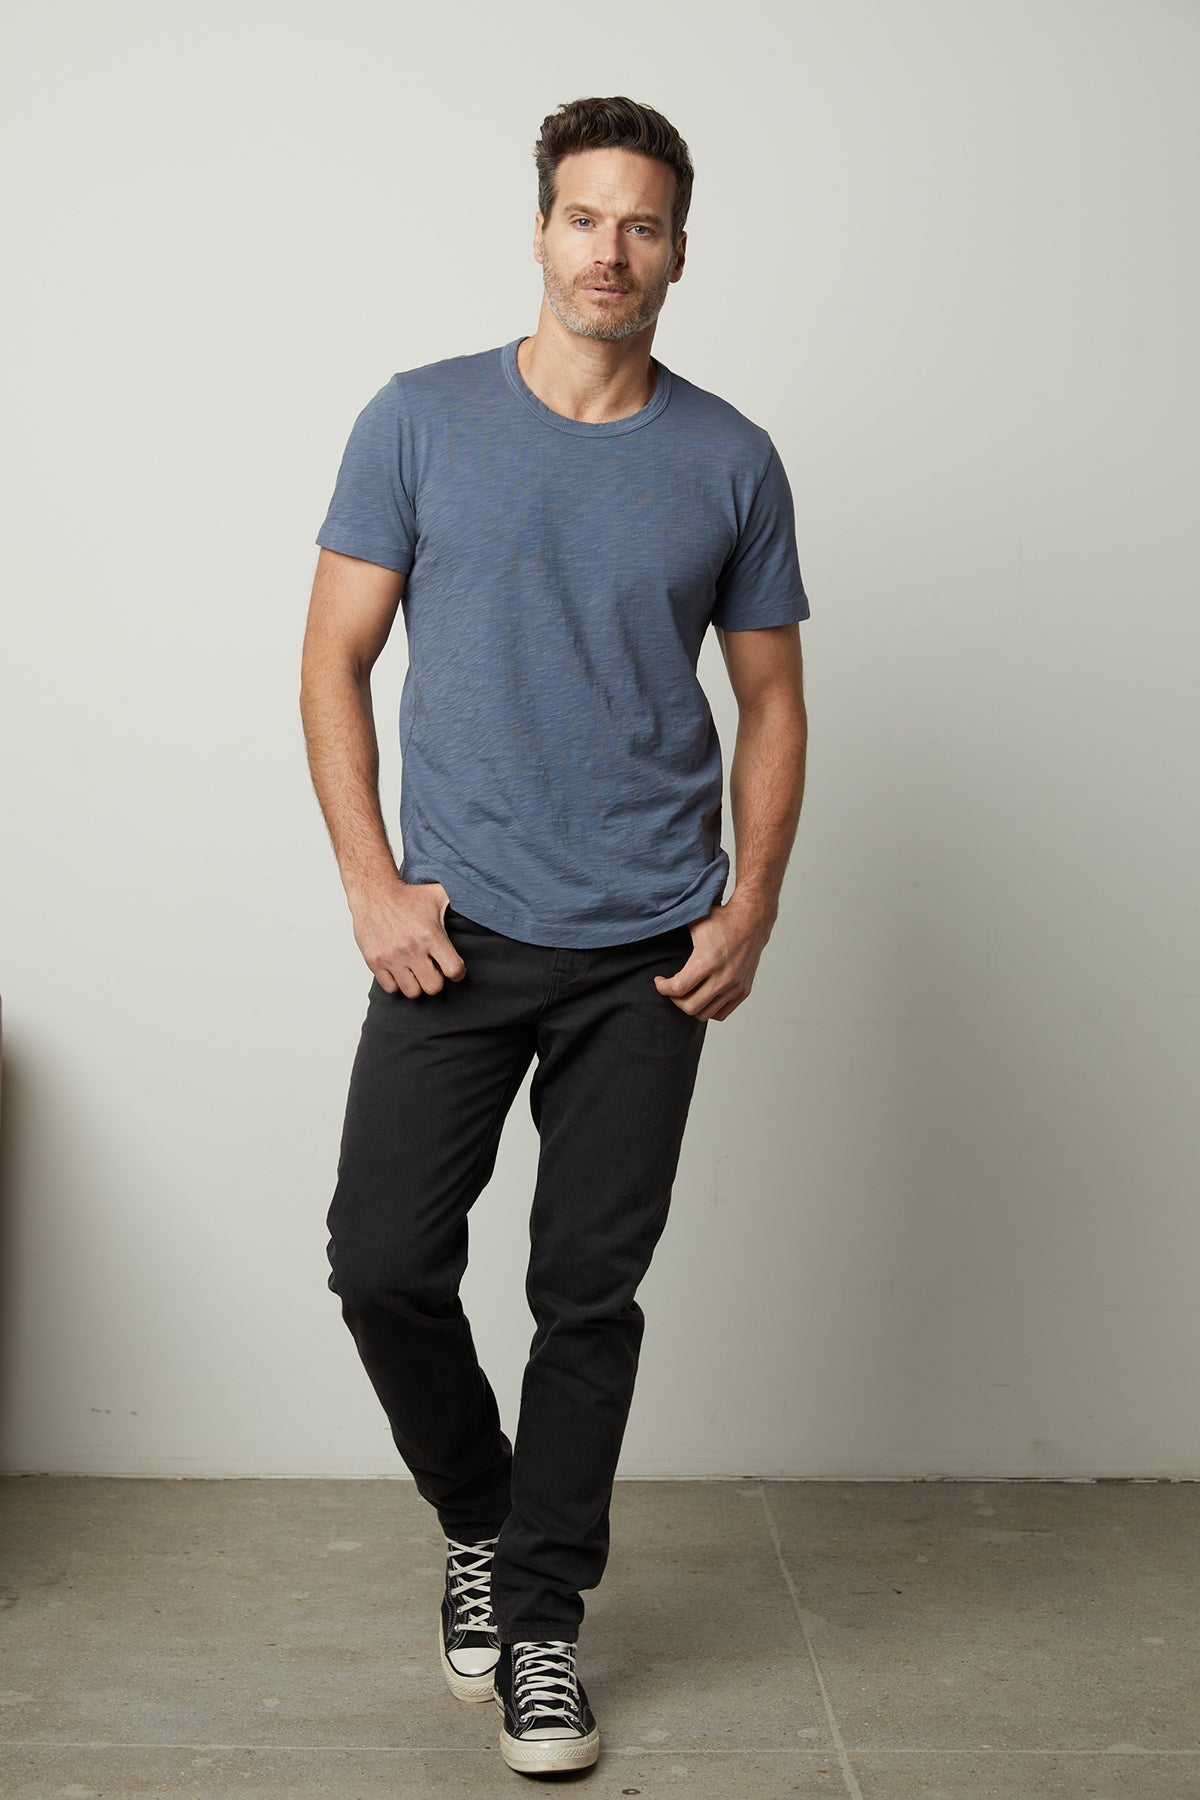 Amaro Short Sleeve Crew Neck tee in Bayou full outfit front view with denim and sneakers-35782657114305